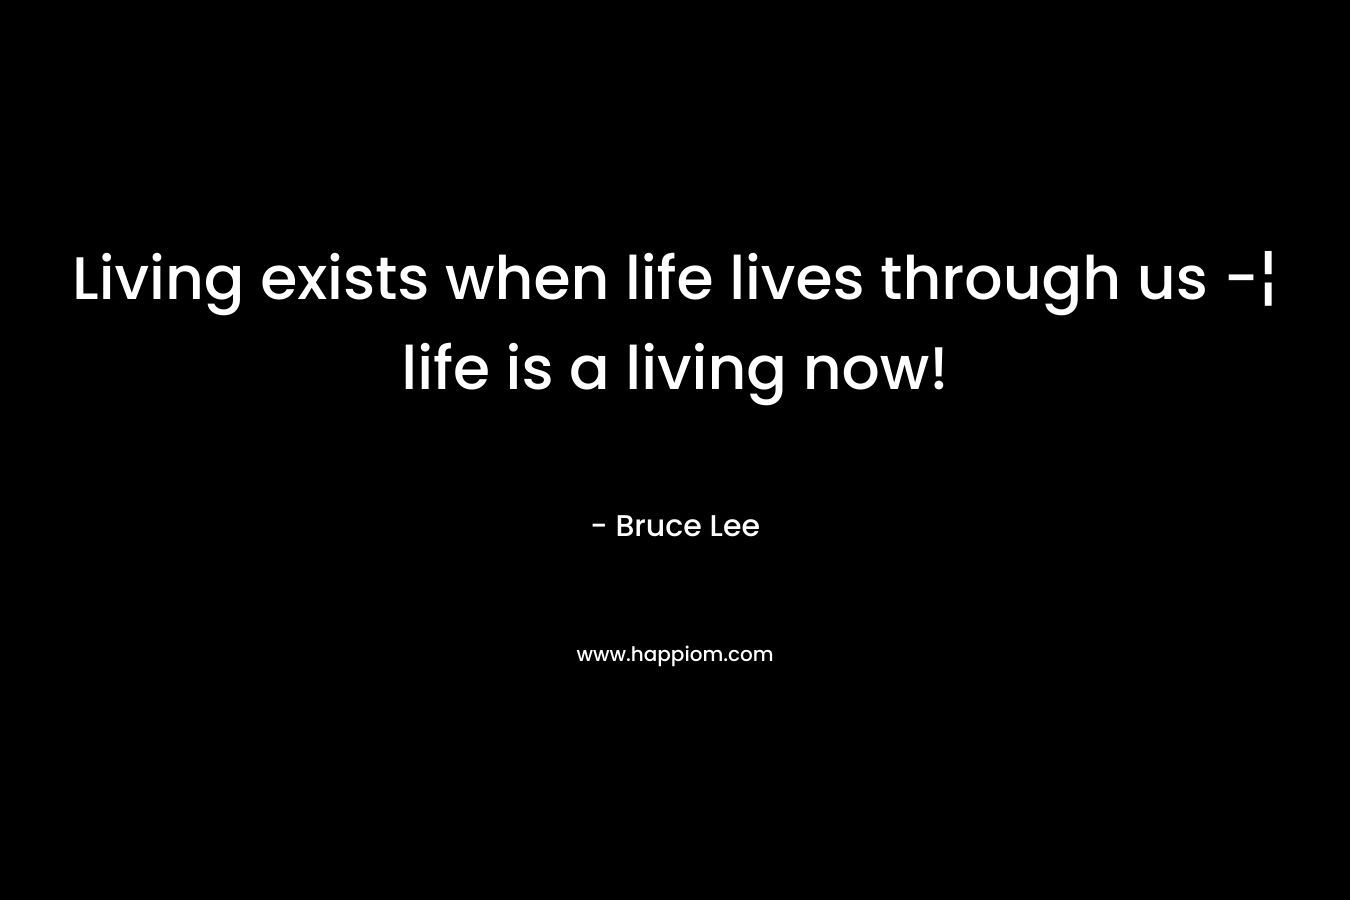 Living exists when life lives through us -¦ life is a living now!